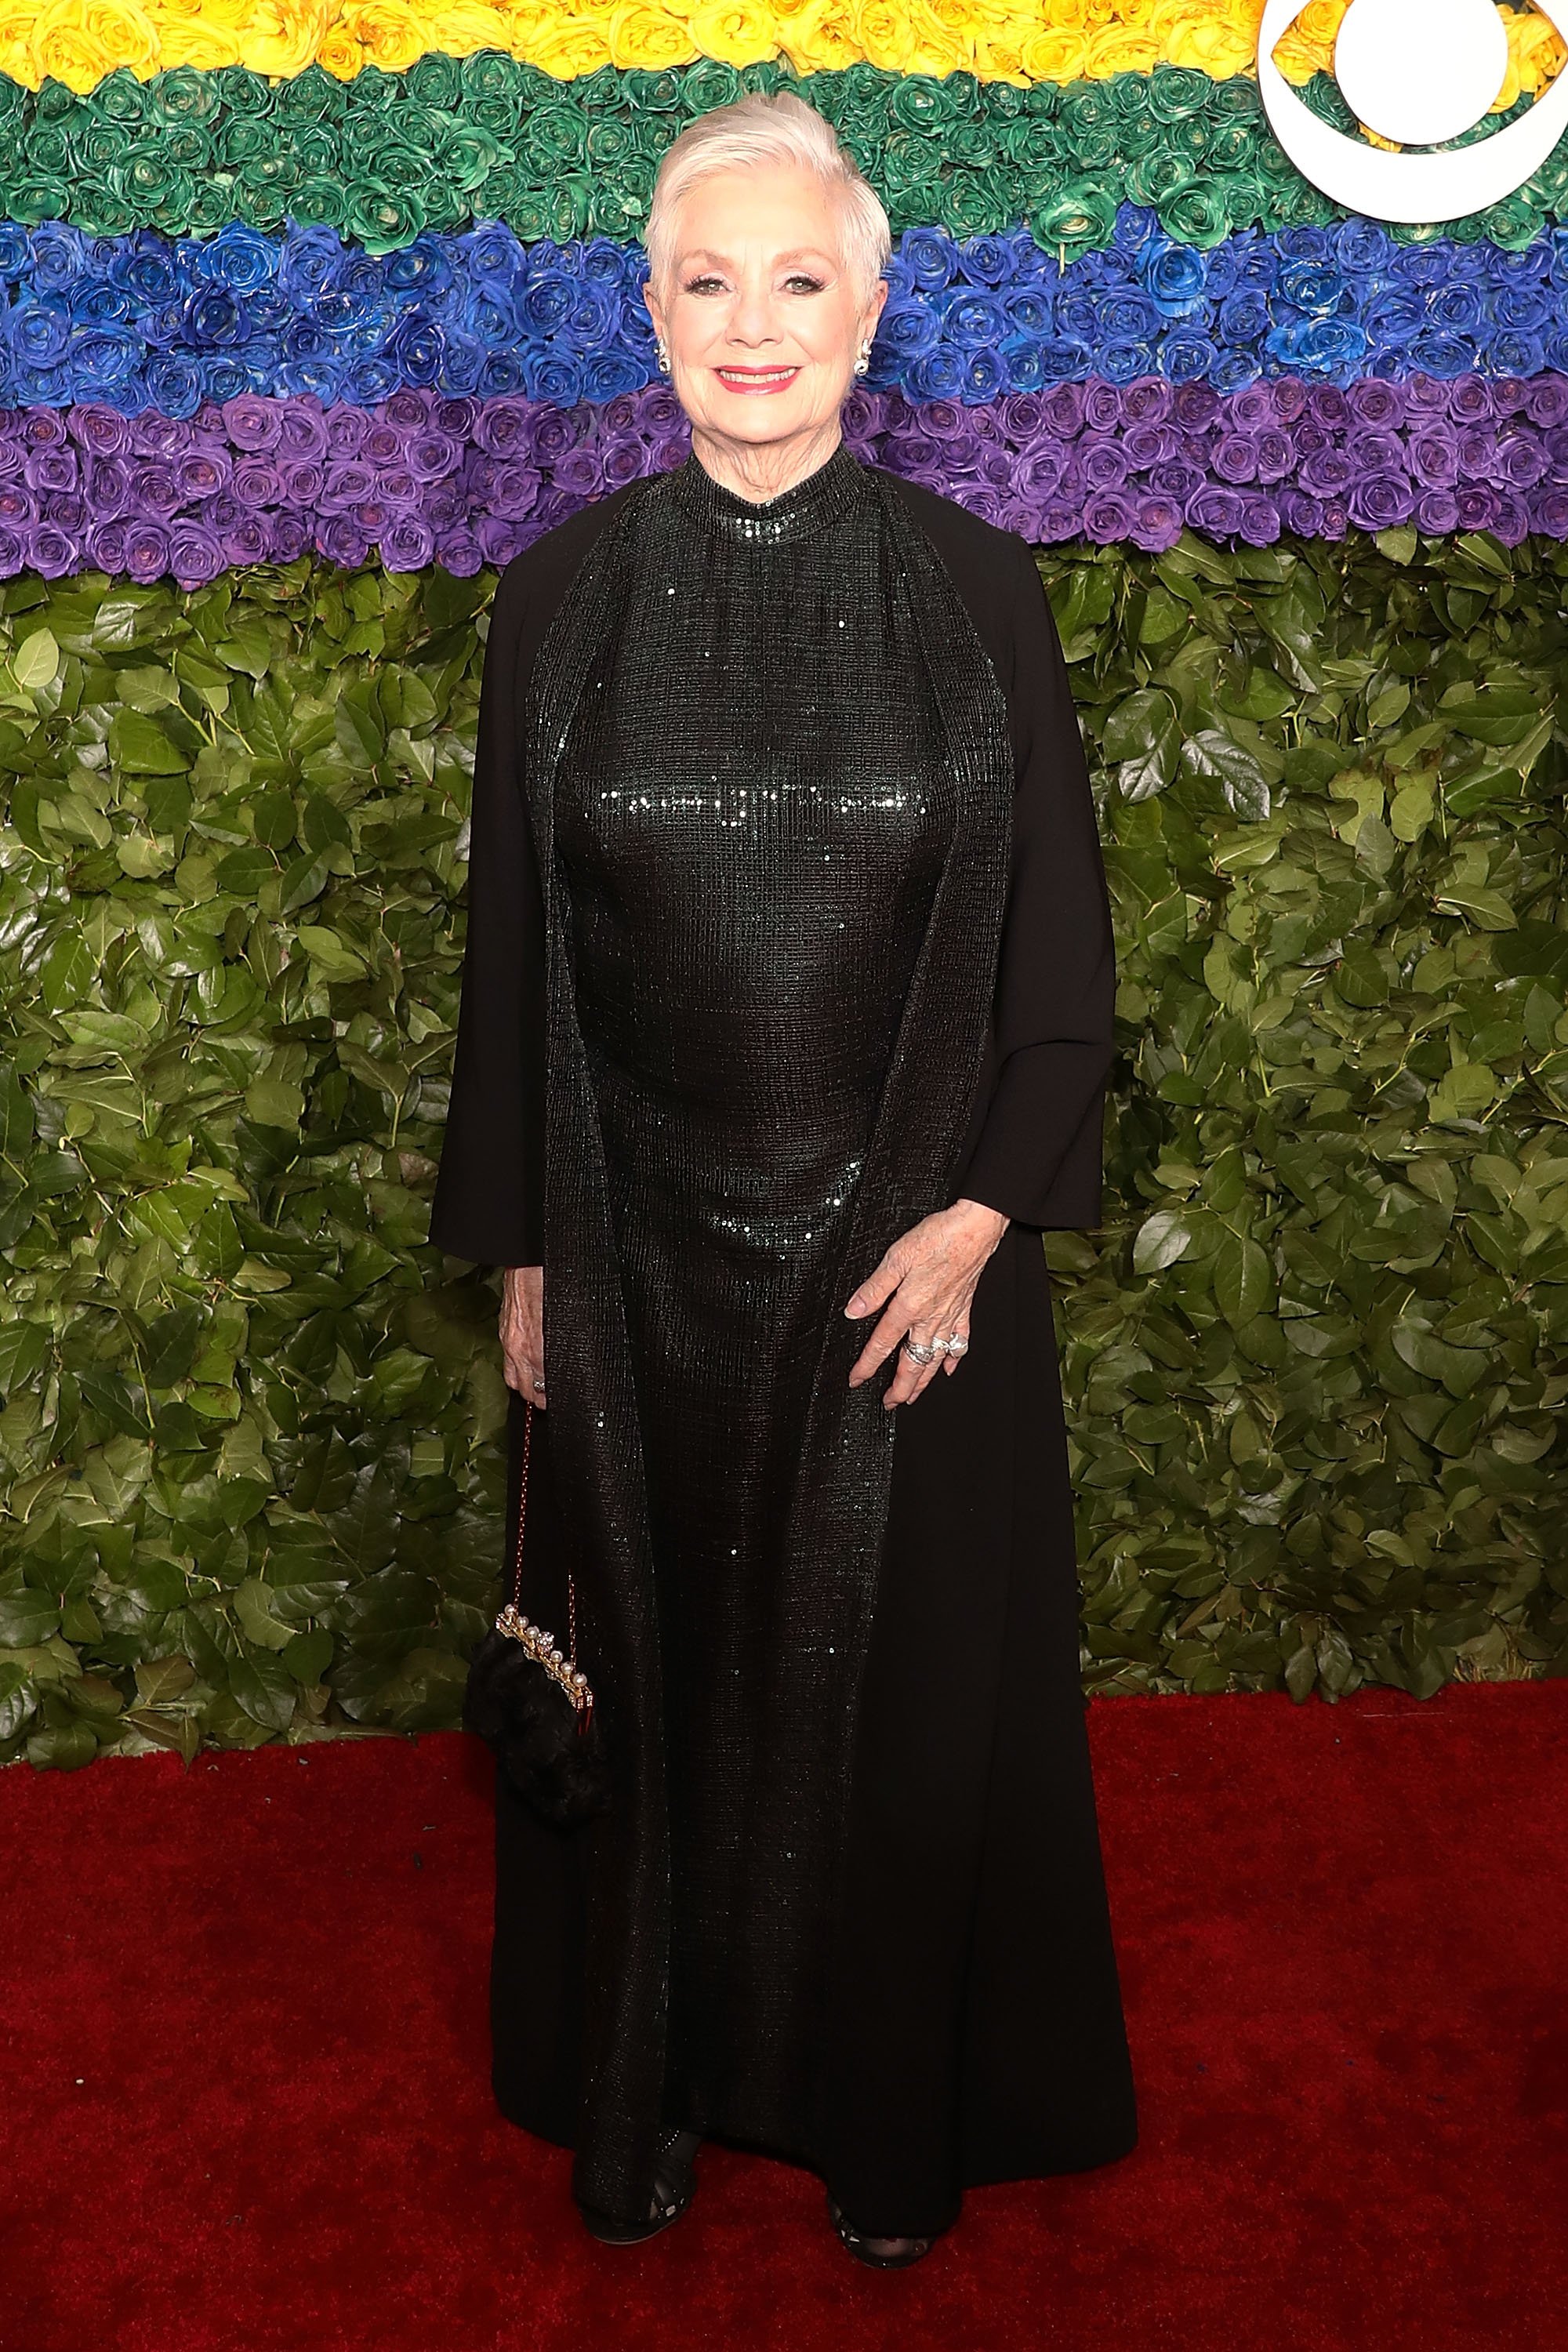 Actress Shirley Jones attends the 2019 Tony Awards at Radio City Music Hall on June 9, 2019 in New York City. | Source: Getty Images